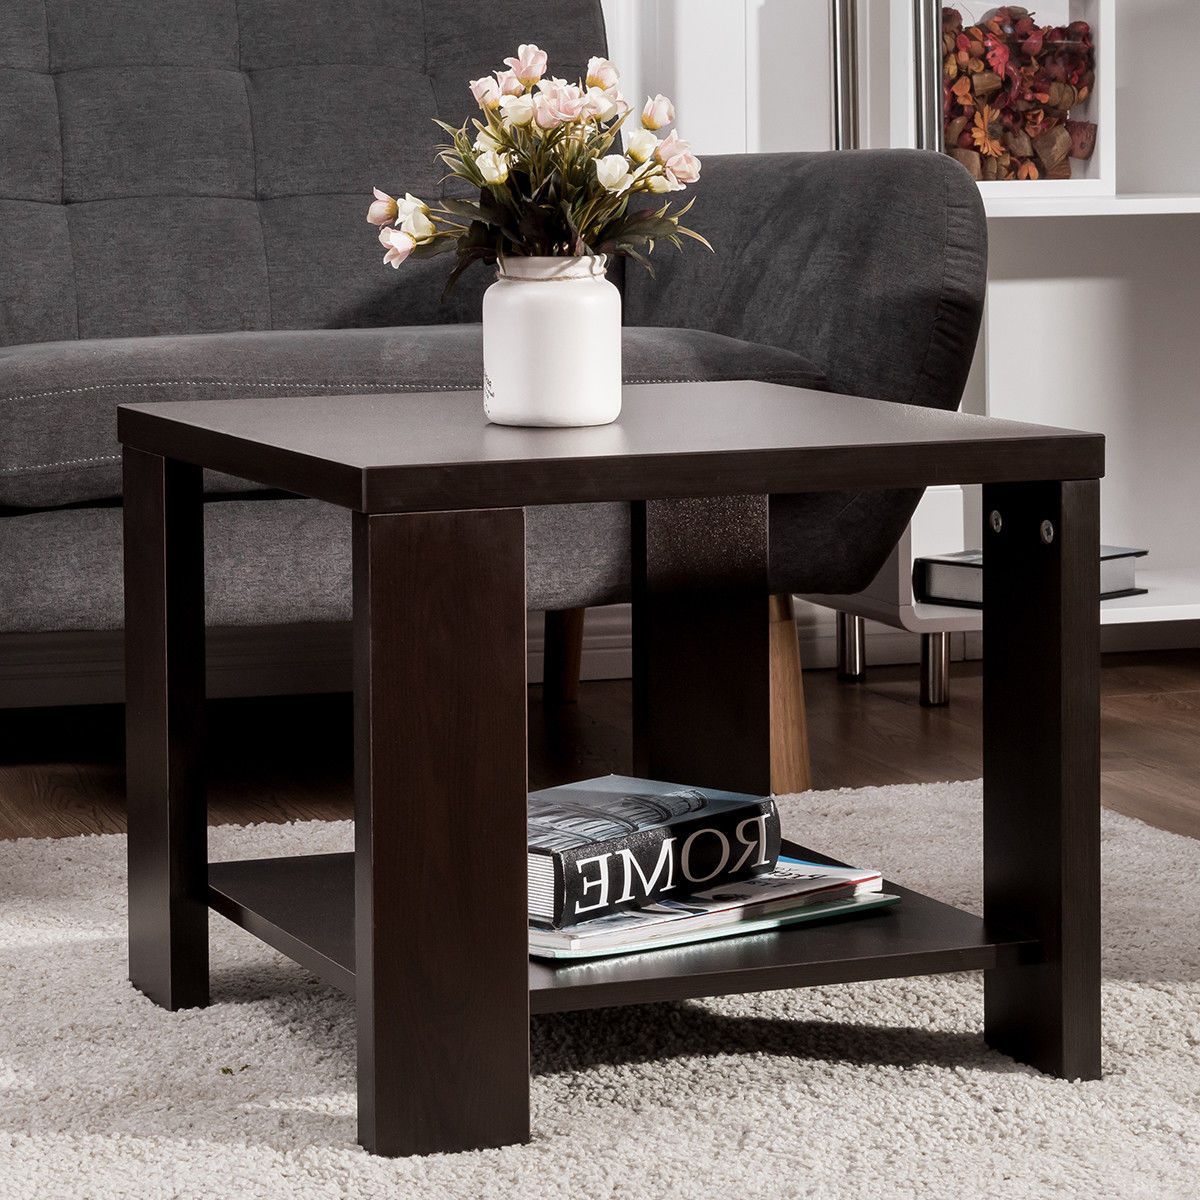 Favorite Espresso Wood Storage Console Tables Intended For Giantex Living Room End Coffee Table Square Sofa Side (View 9 of 10)